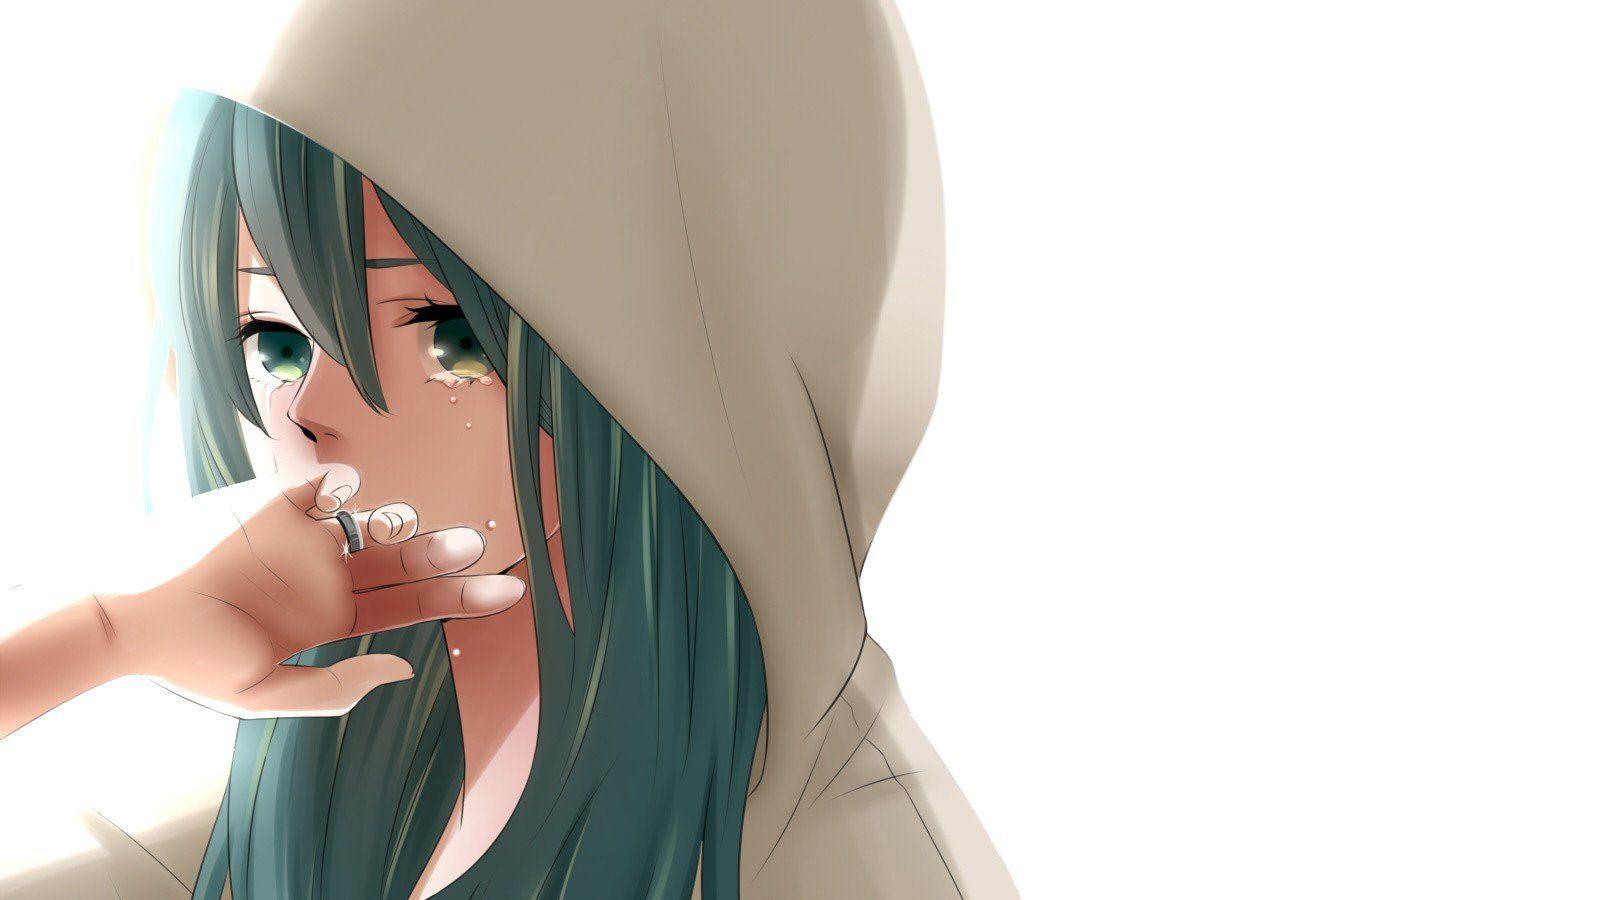 Crying Anime Girl Background Wallpaper 21536